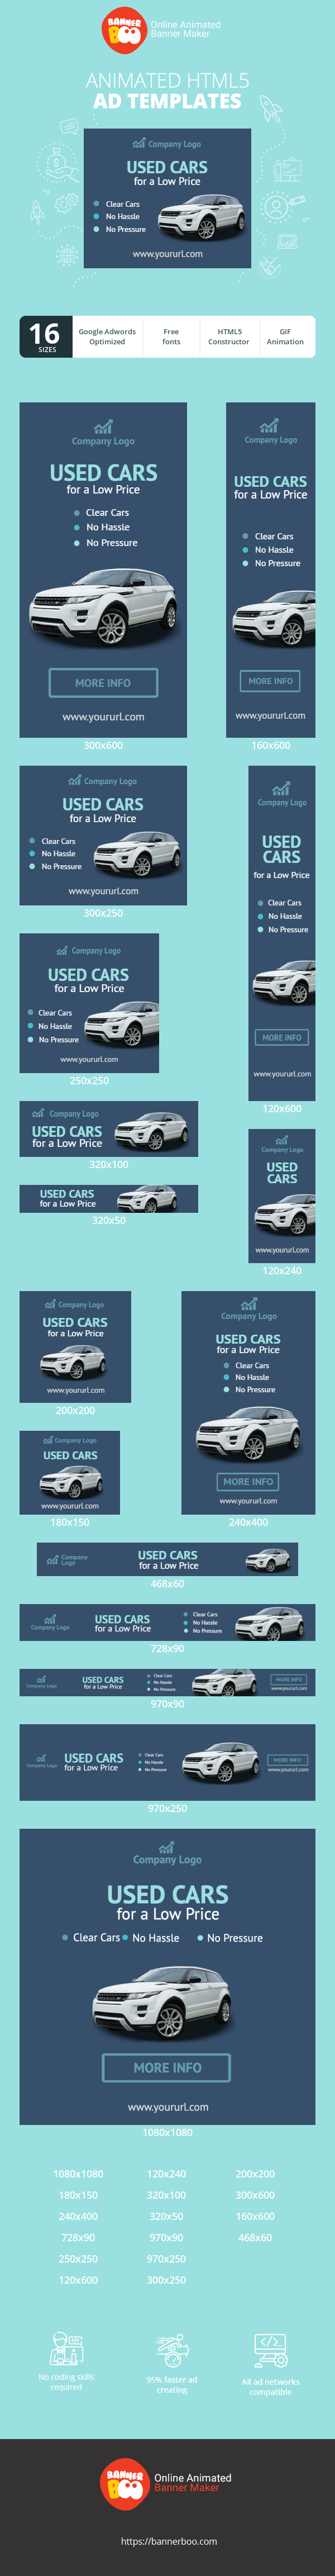 Banner ad template — Used Cars for a Low Price